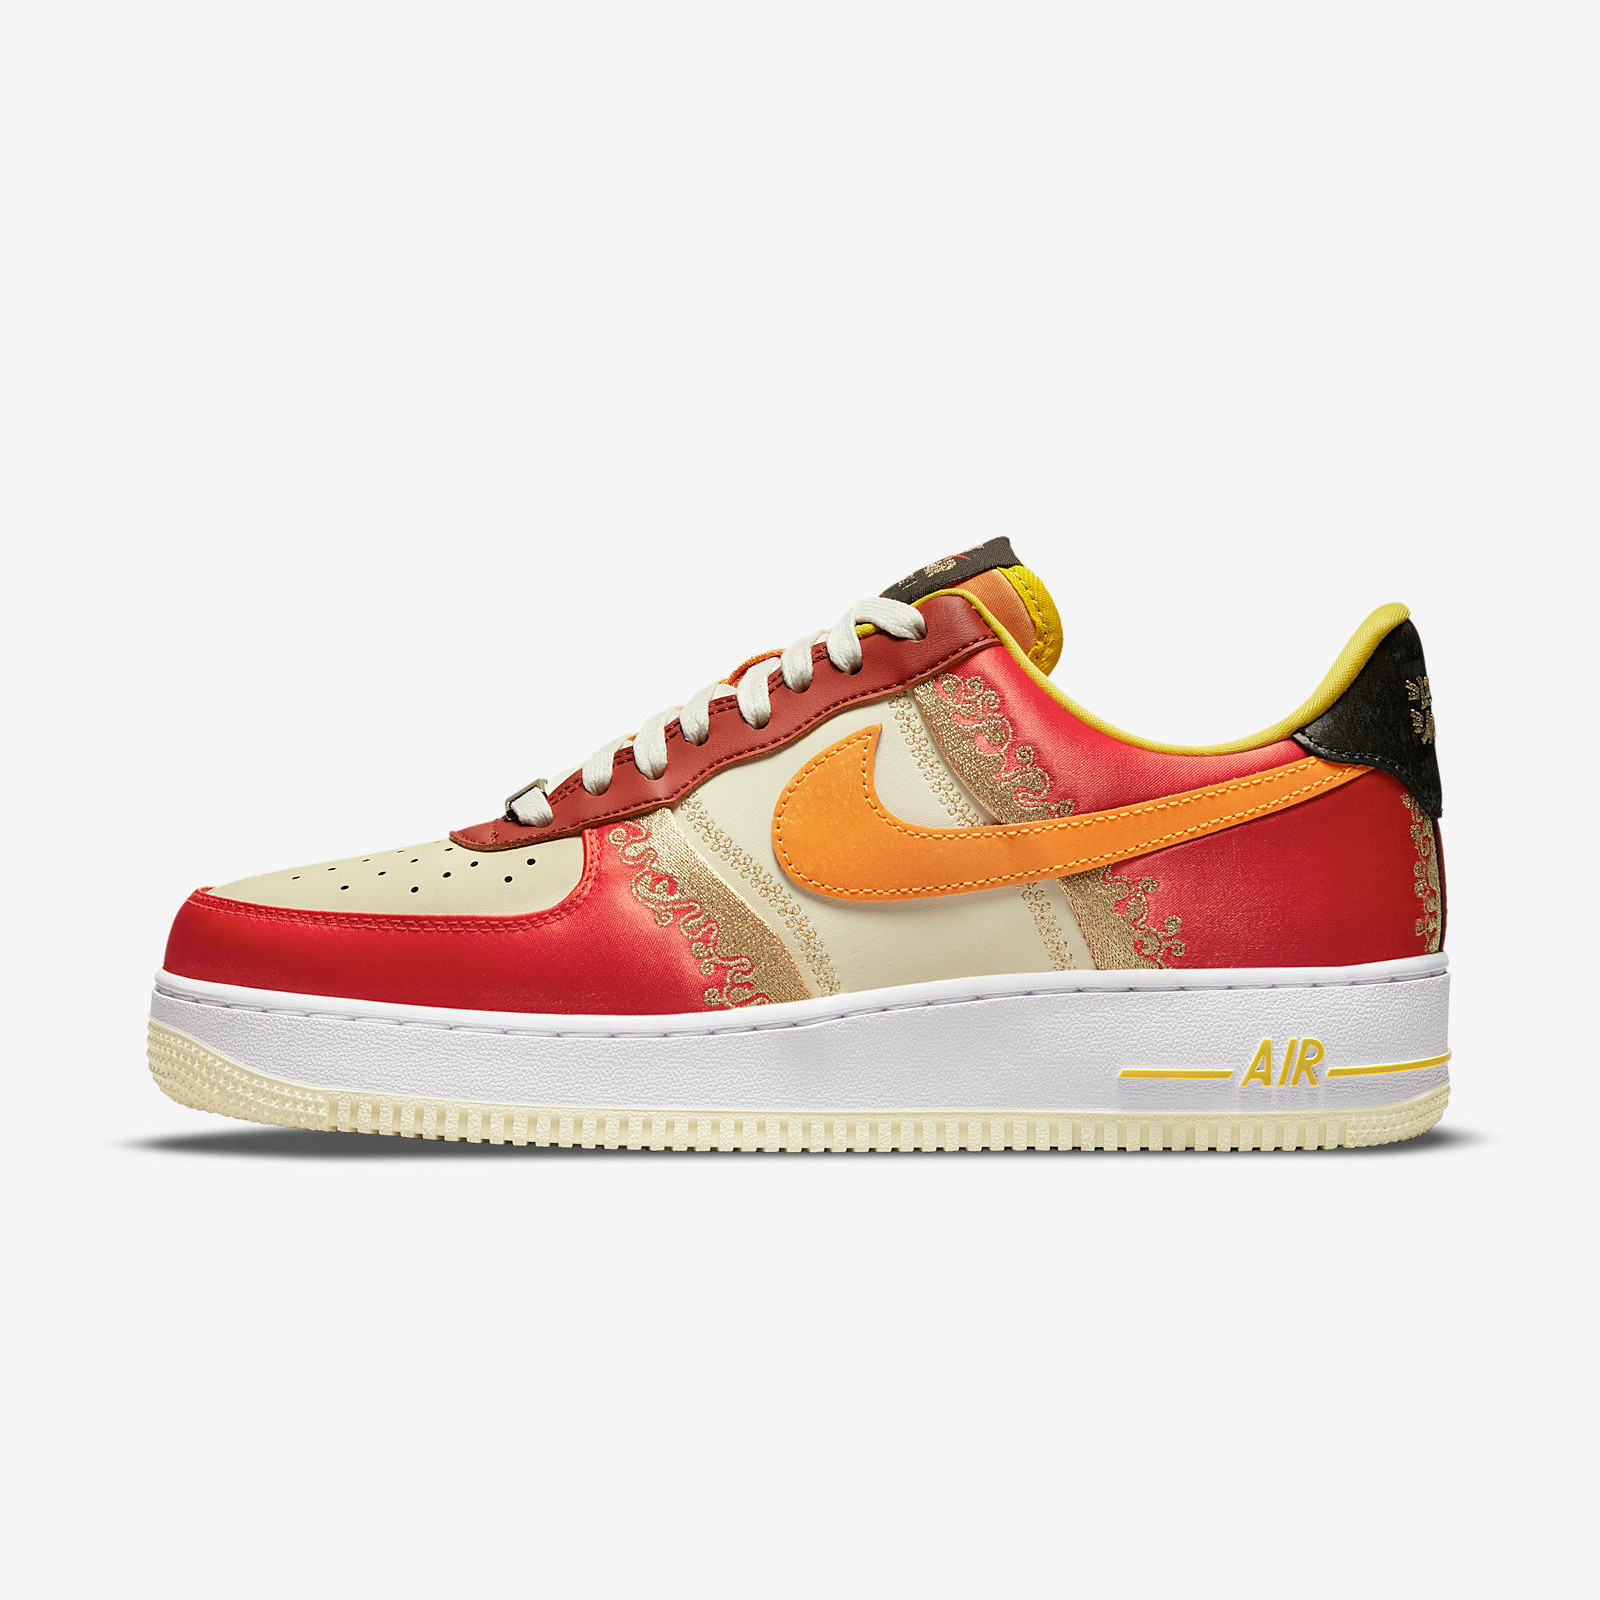 Nike Air Force 1 Low
« Little Accra »